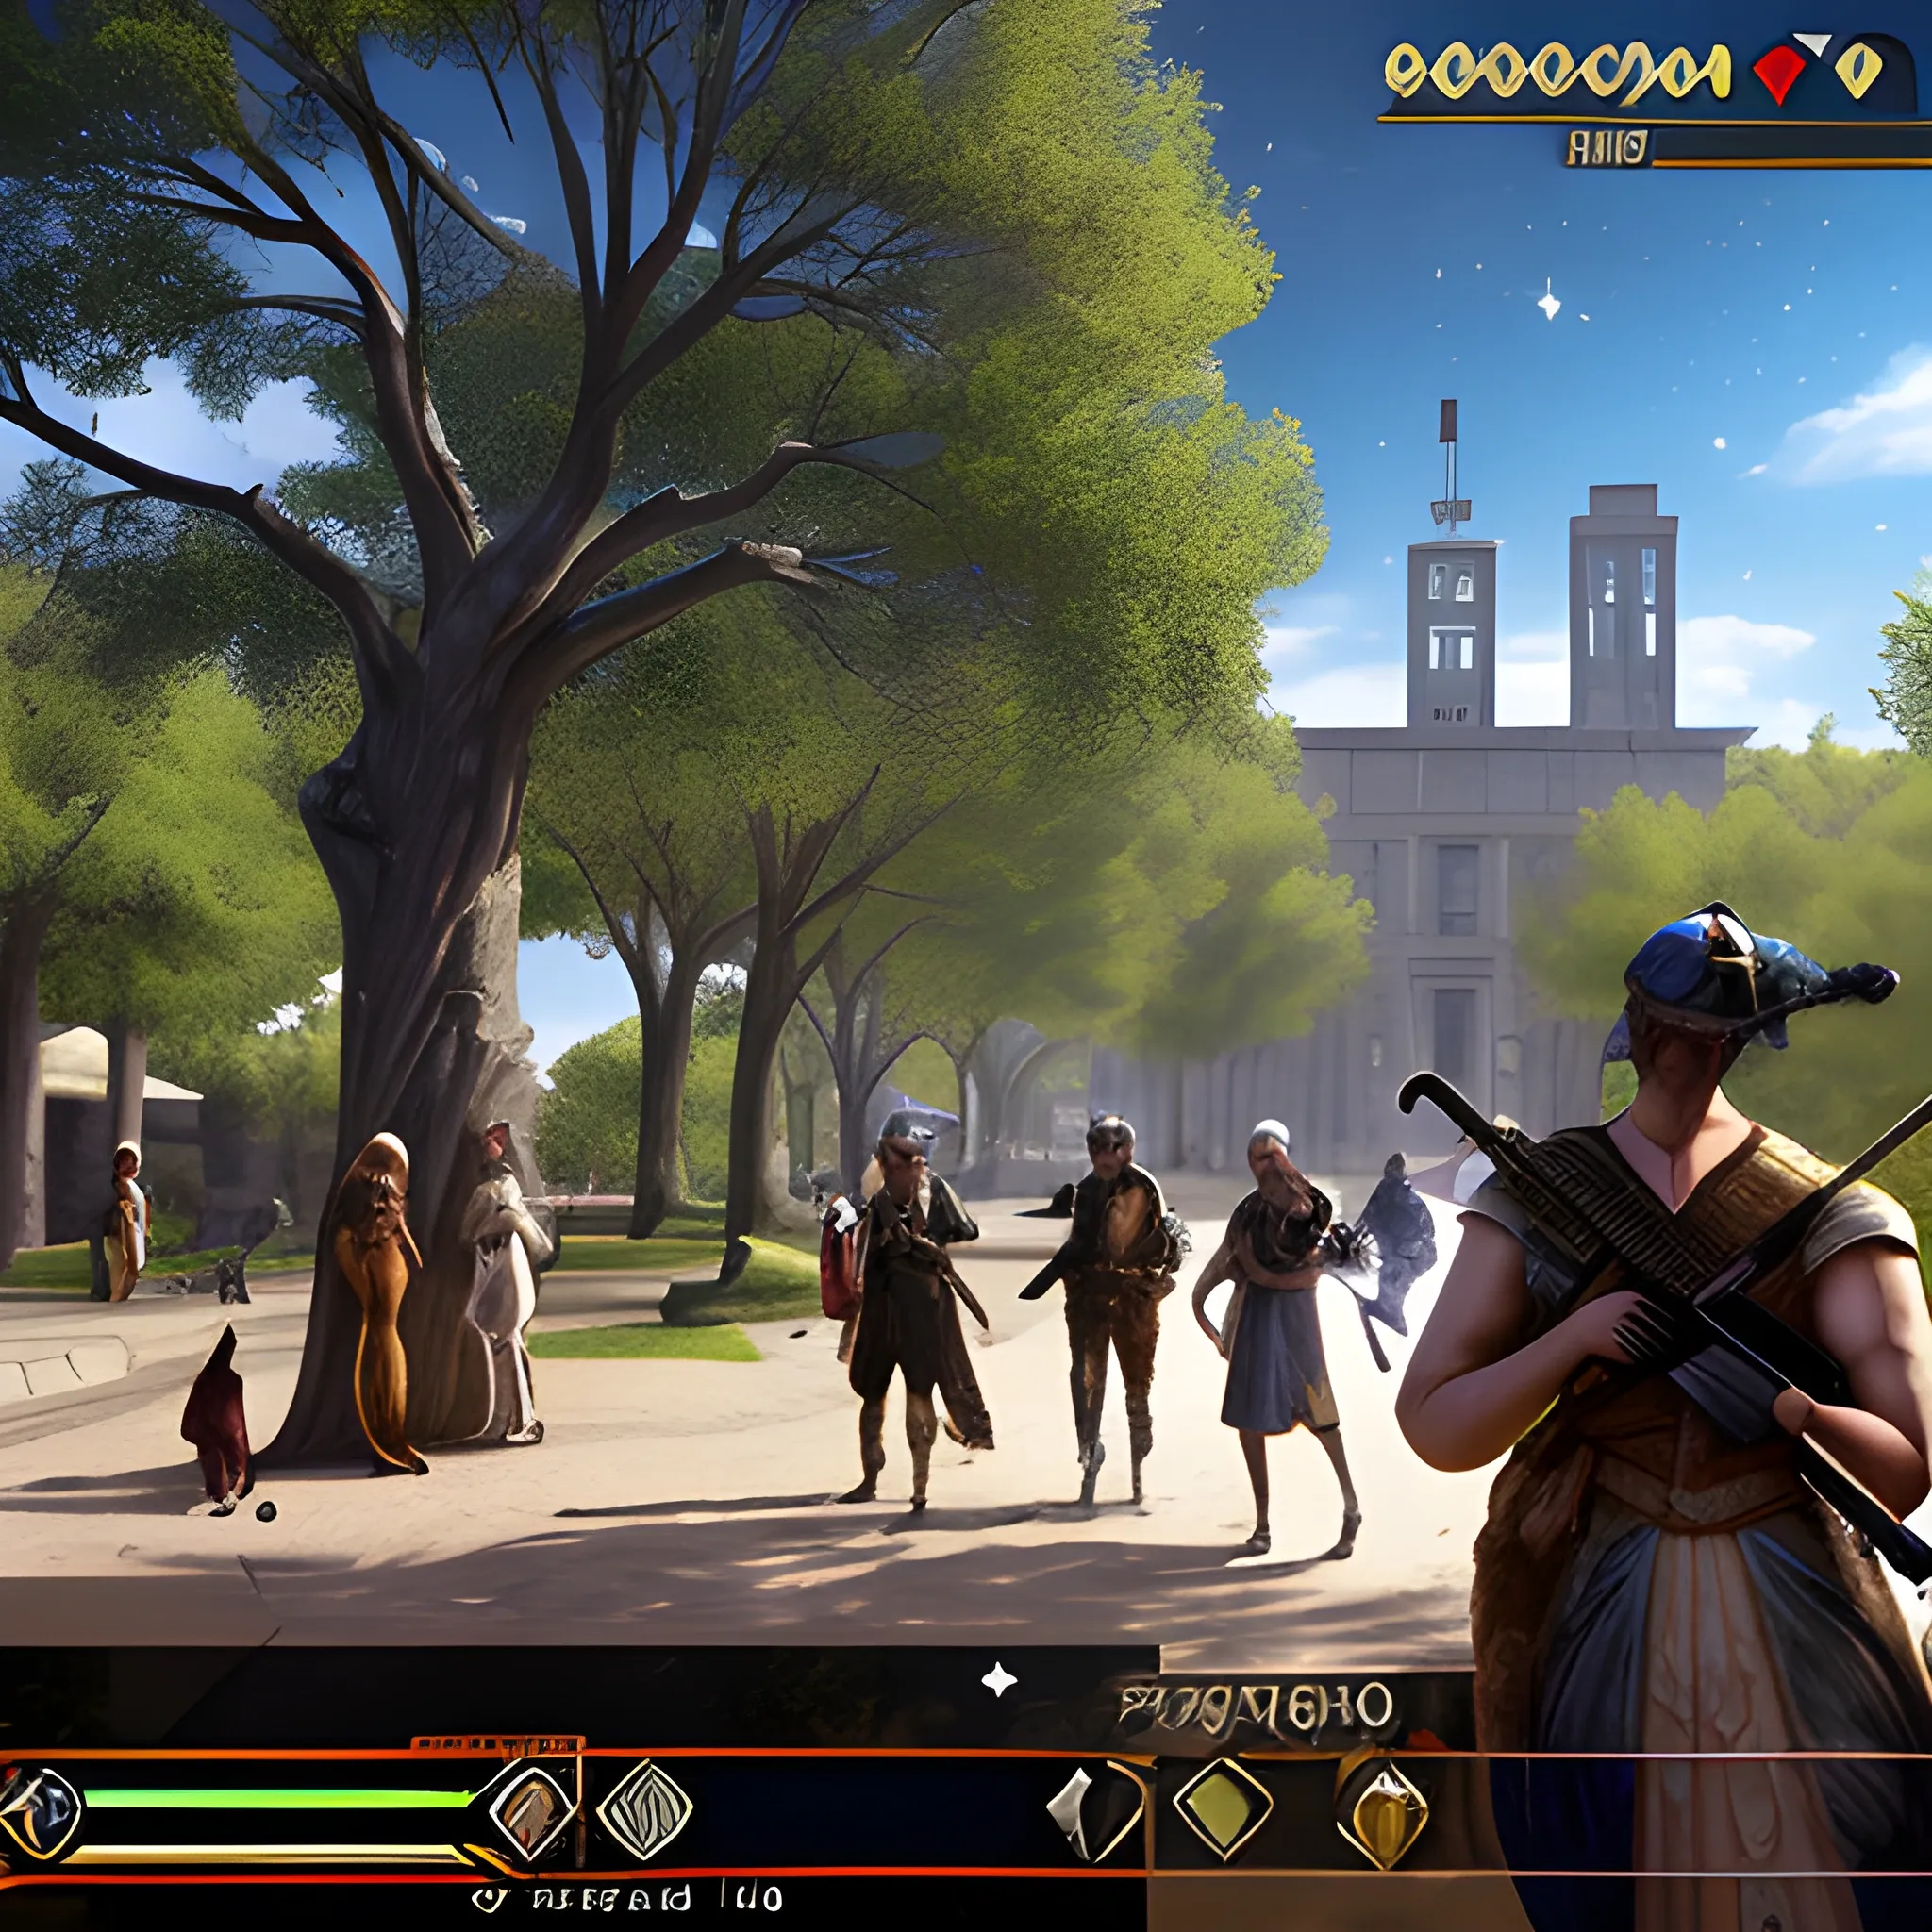 videogame screenshot with huge spangly sparkly double bassoon assault rifle in foreground, with pedestrians walking dogs, in a municipal park, in the ancient world, very detailed